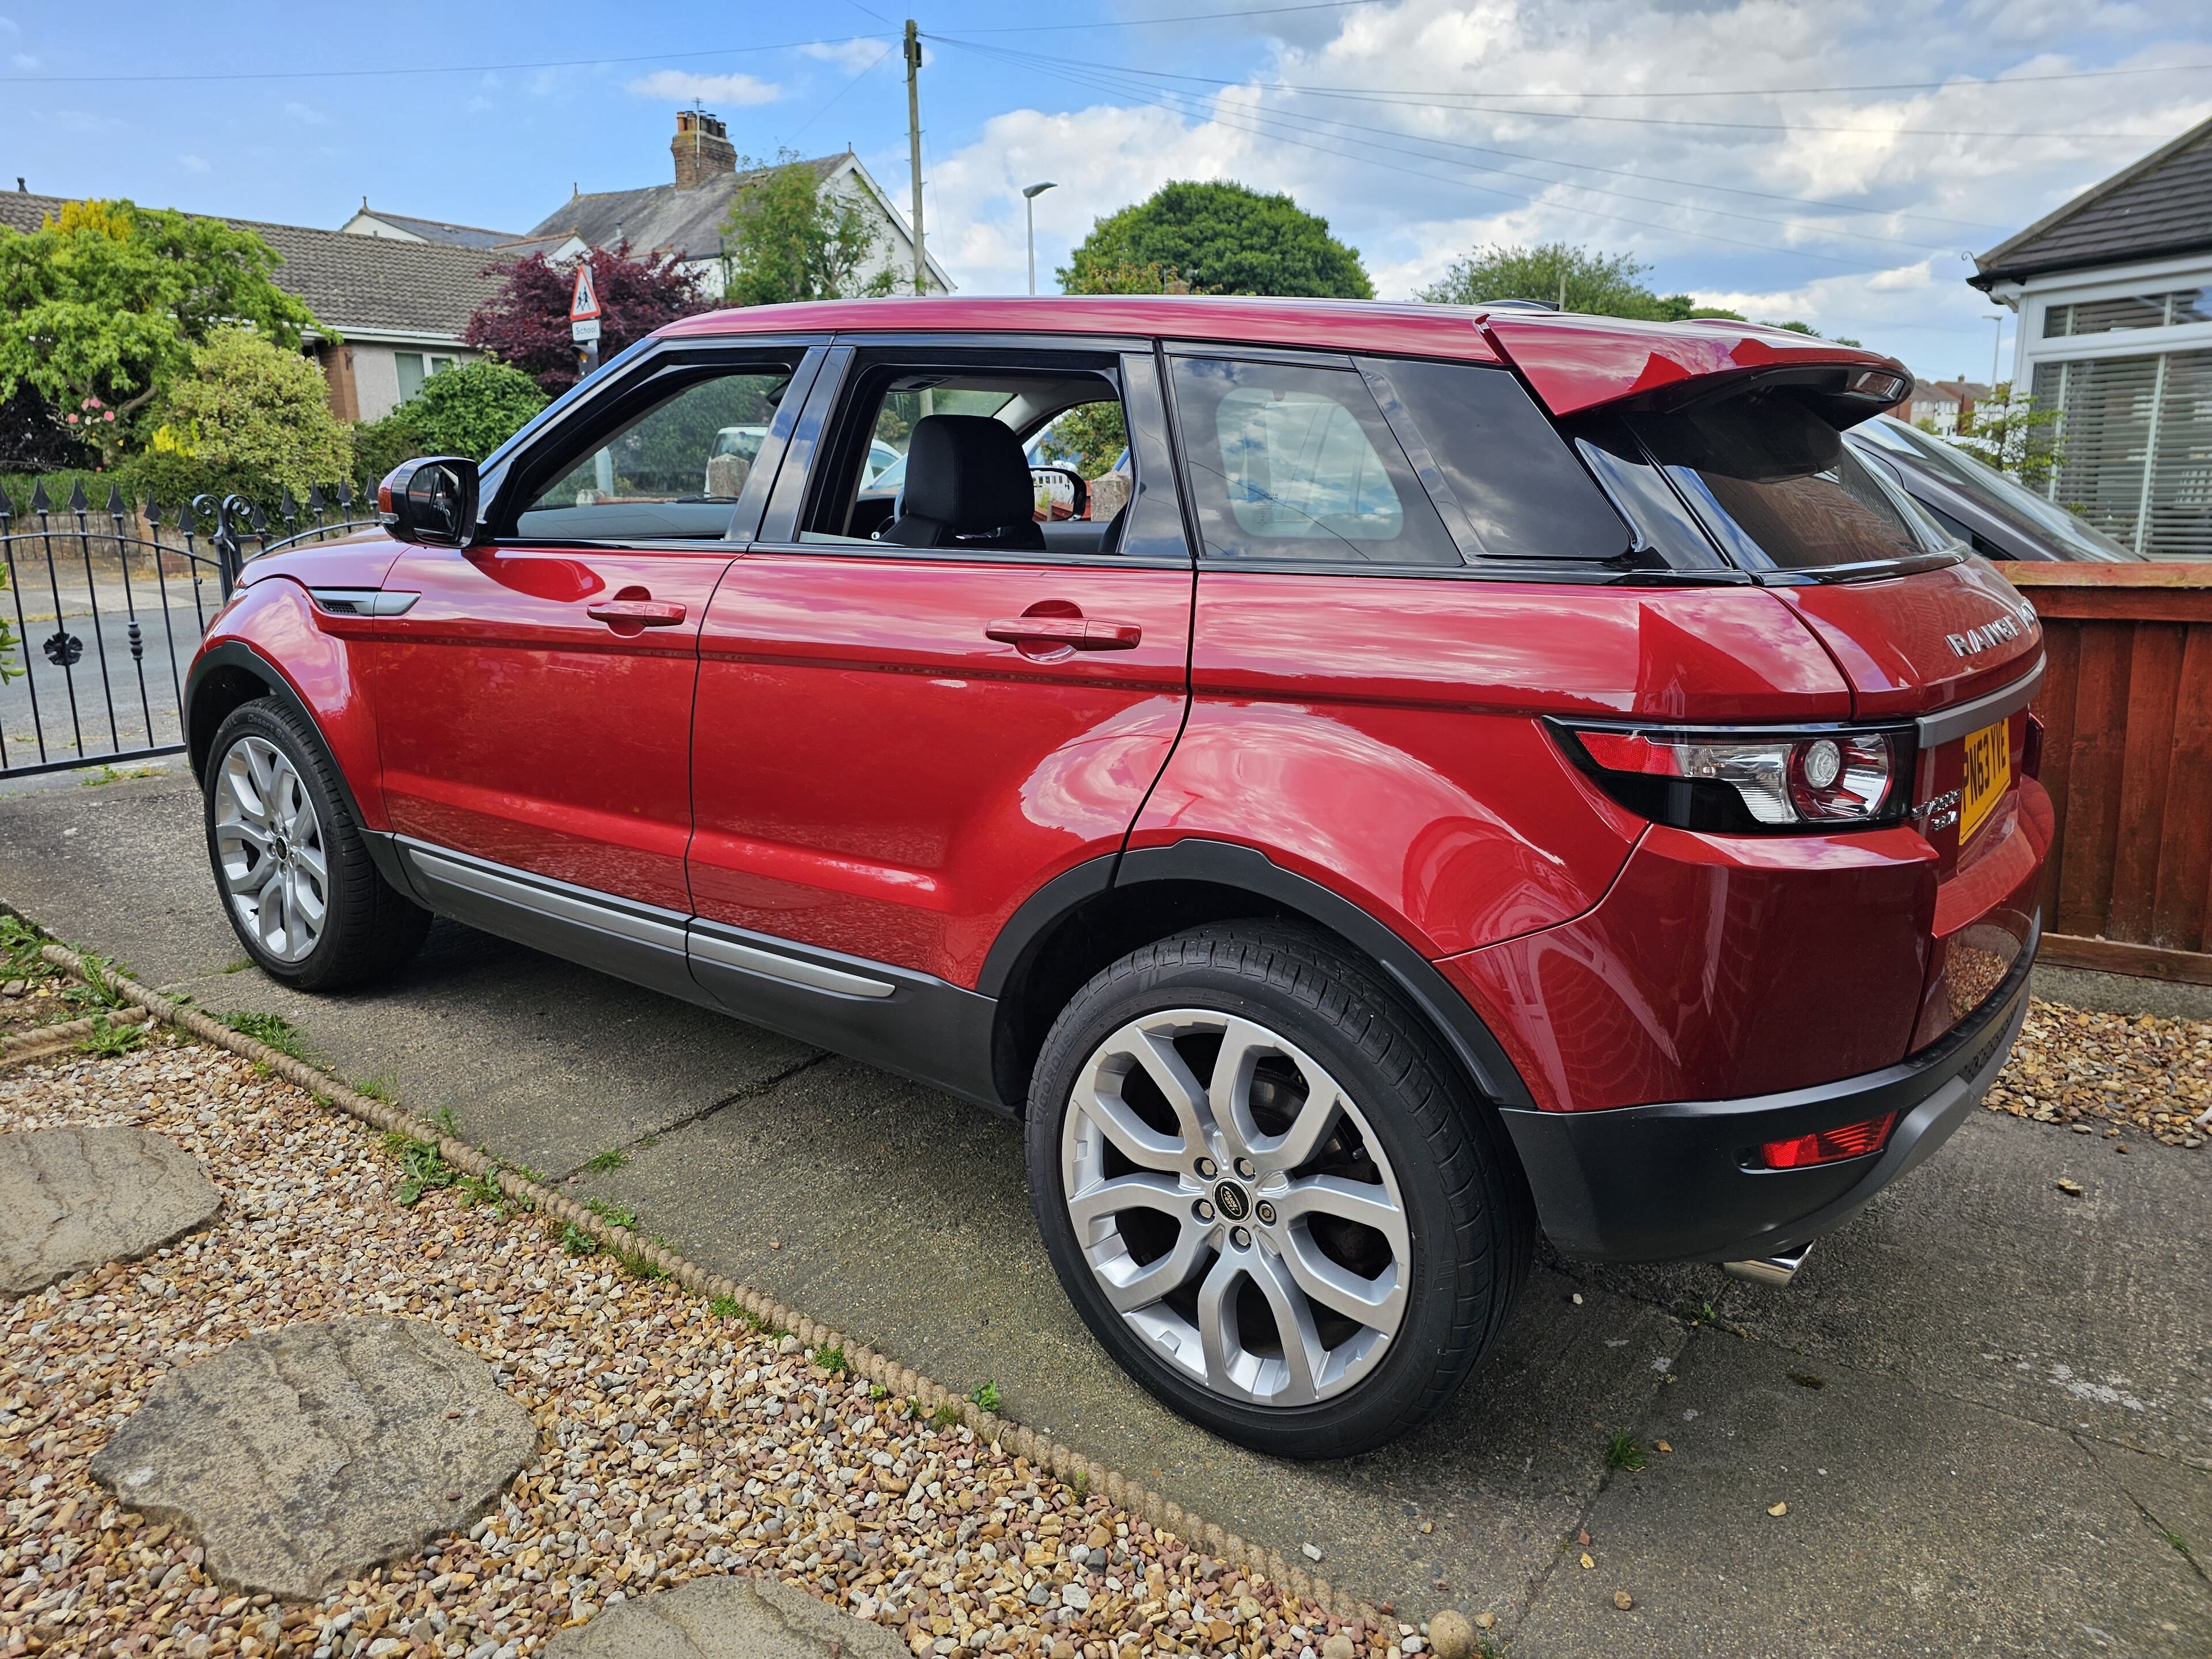 SUV Advice needed - Page 1 - Car Buying - PistonHeads UK - The image shows a vibrant red Range Rover parked on the side of a road. It's a large SUV, featuring black roof rails and silver wheels. The vehicle is positioned next to a fence and a hedge, suggesting it might be outside someone's home. There are no visible people in the picture. The photo appears to be taken during the day under clear skies.